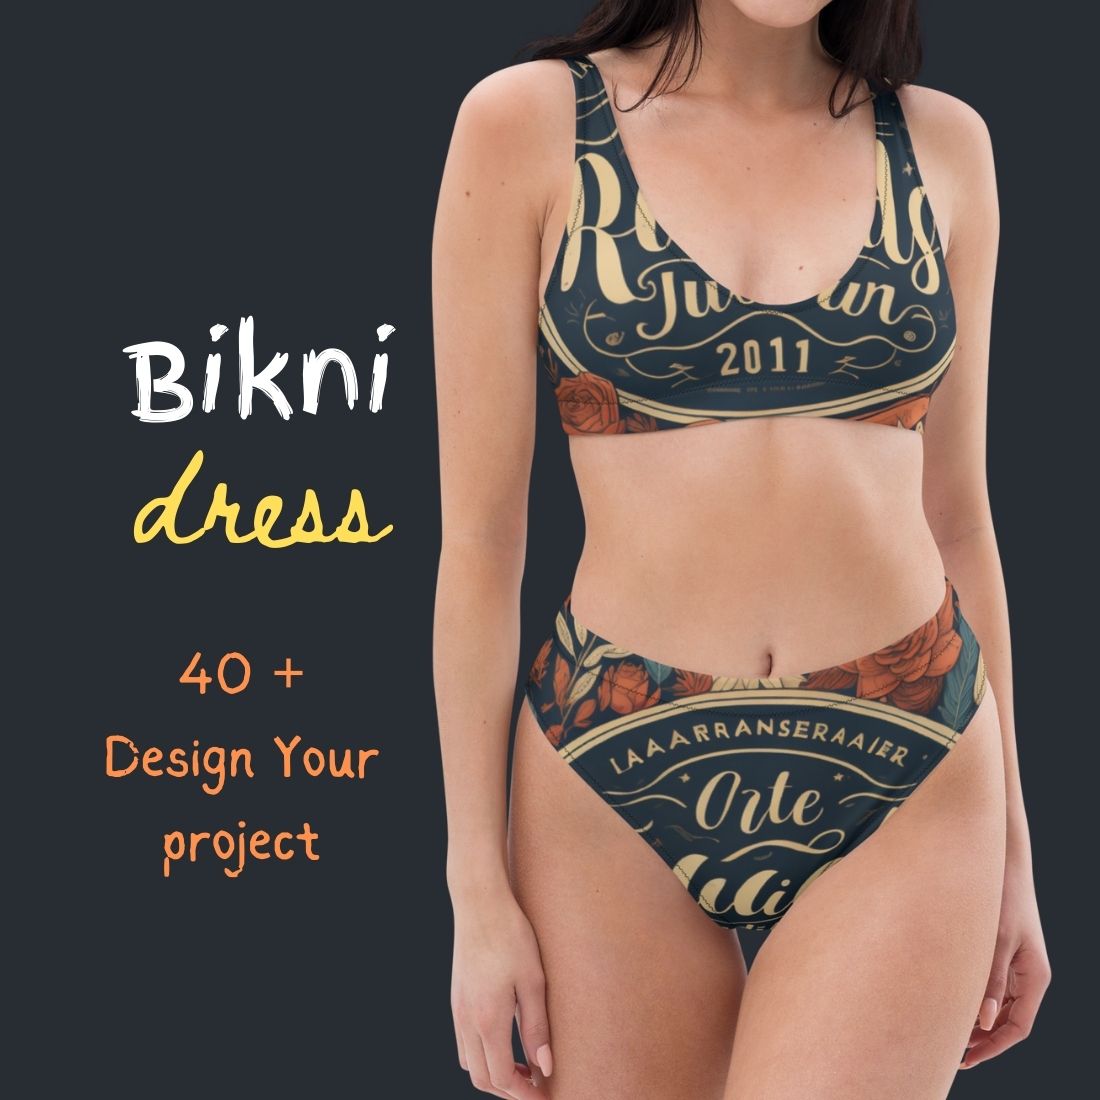 Bikini new style for ladies preview image.